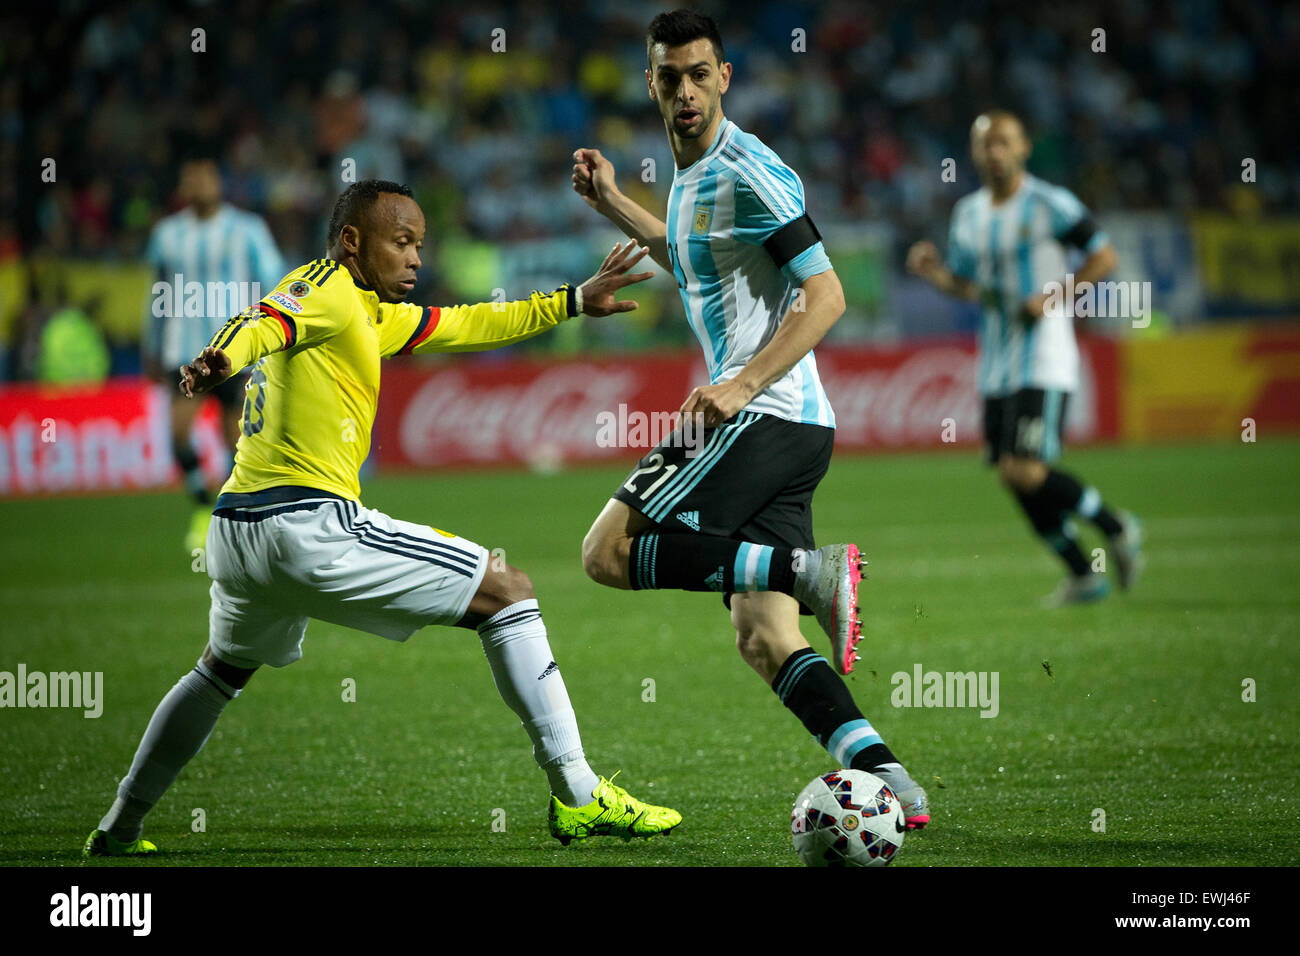 Vina Del Mar, Chile. 26th June, 2015. Argentina's Javier Pastore (R) vies the ball with Colombia's Juan Zuniga during the quarter-final match between Argentina and Colombia at the Copa America Chile 2015 in the El Sausalito Stadium, in Vina del Mar city, Chile, on June 26, 2015. Credit:  Pedro Mera/Xinhua/Alamy Live News Stock Photo